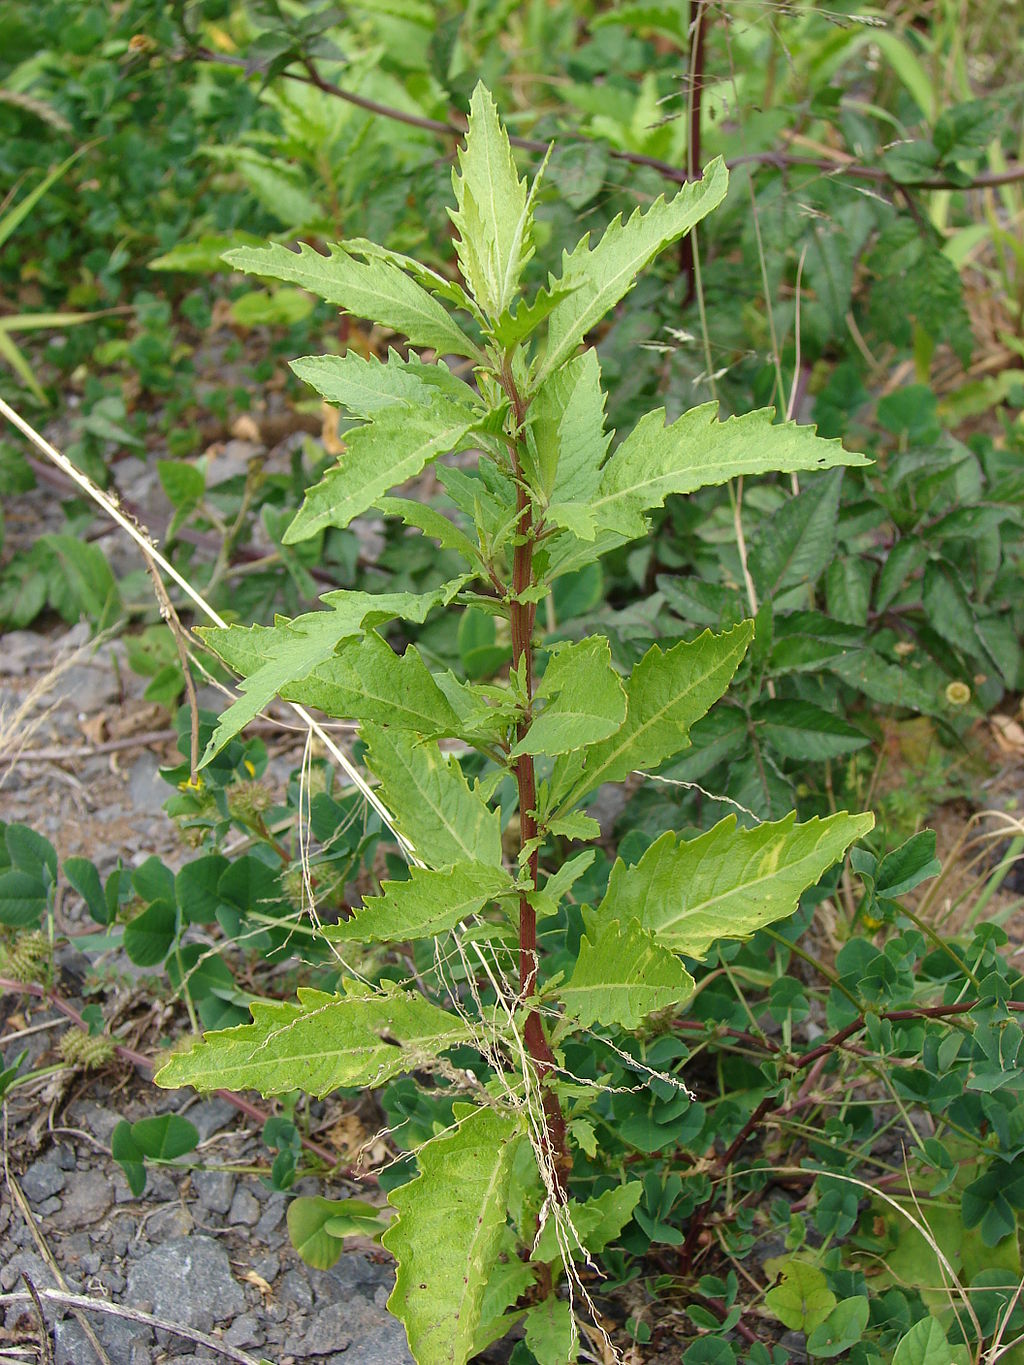 Growth habit of a young plant with dark red central stem